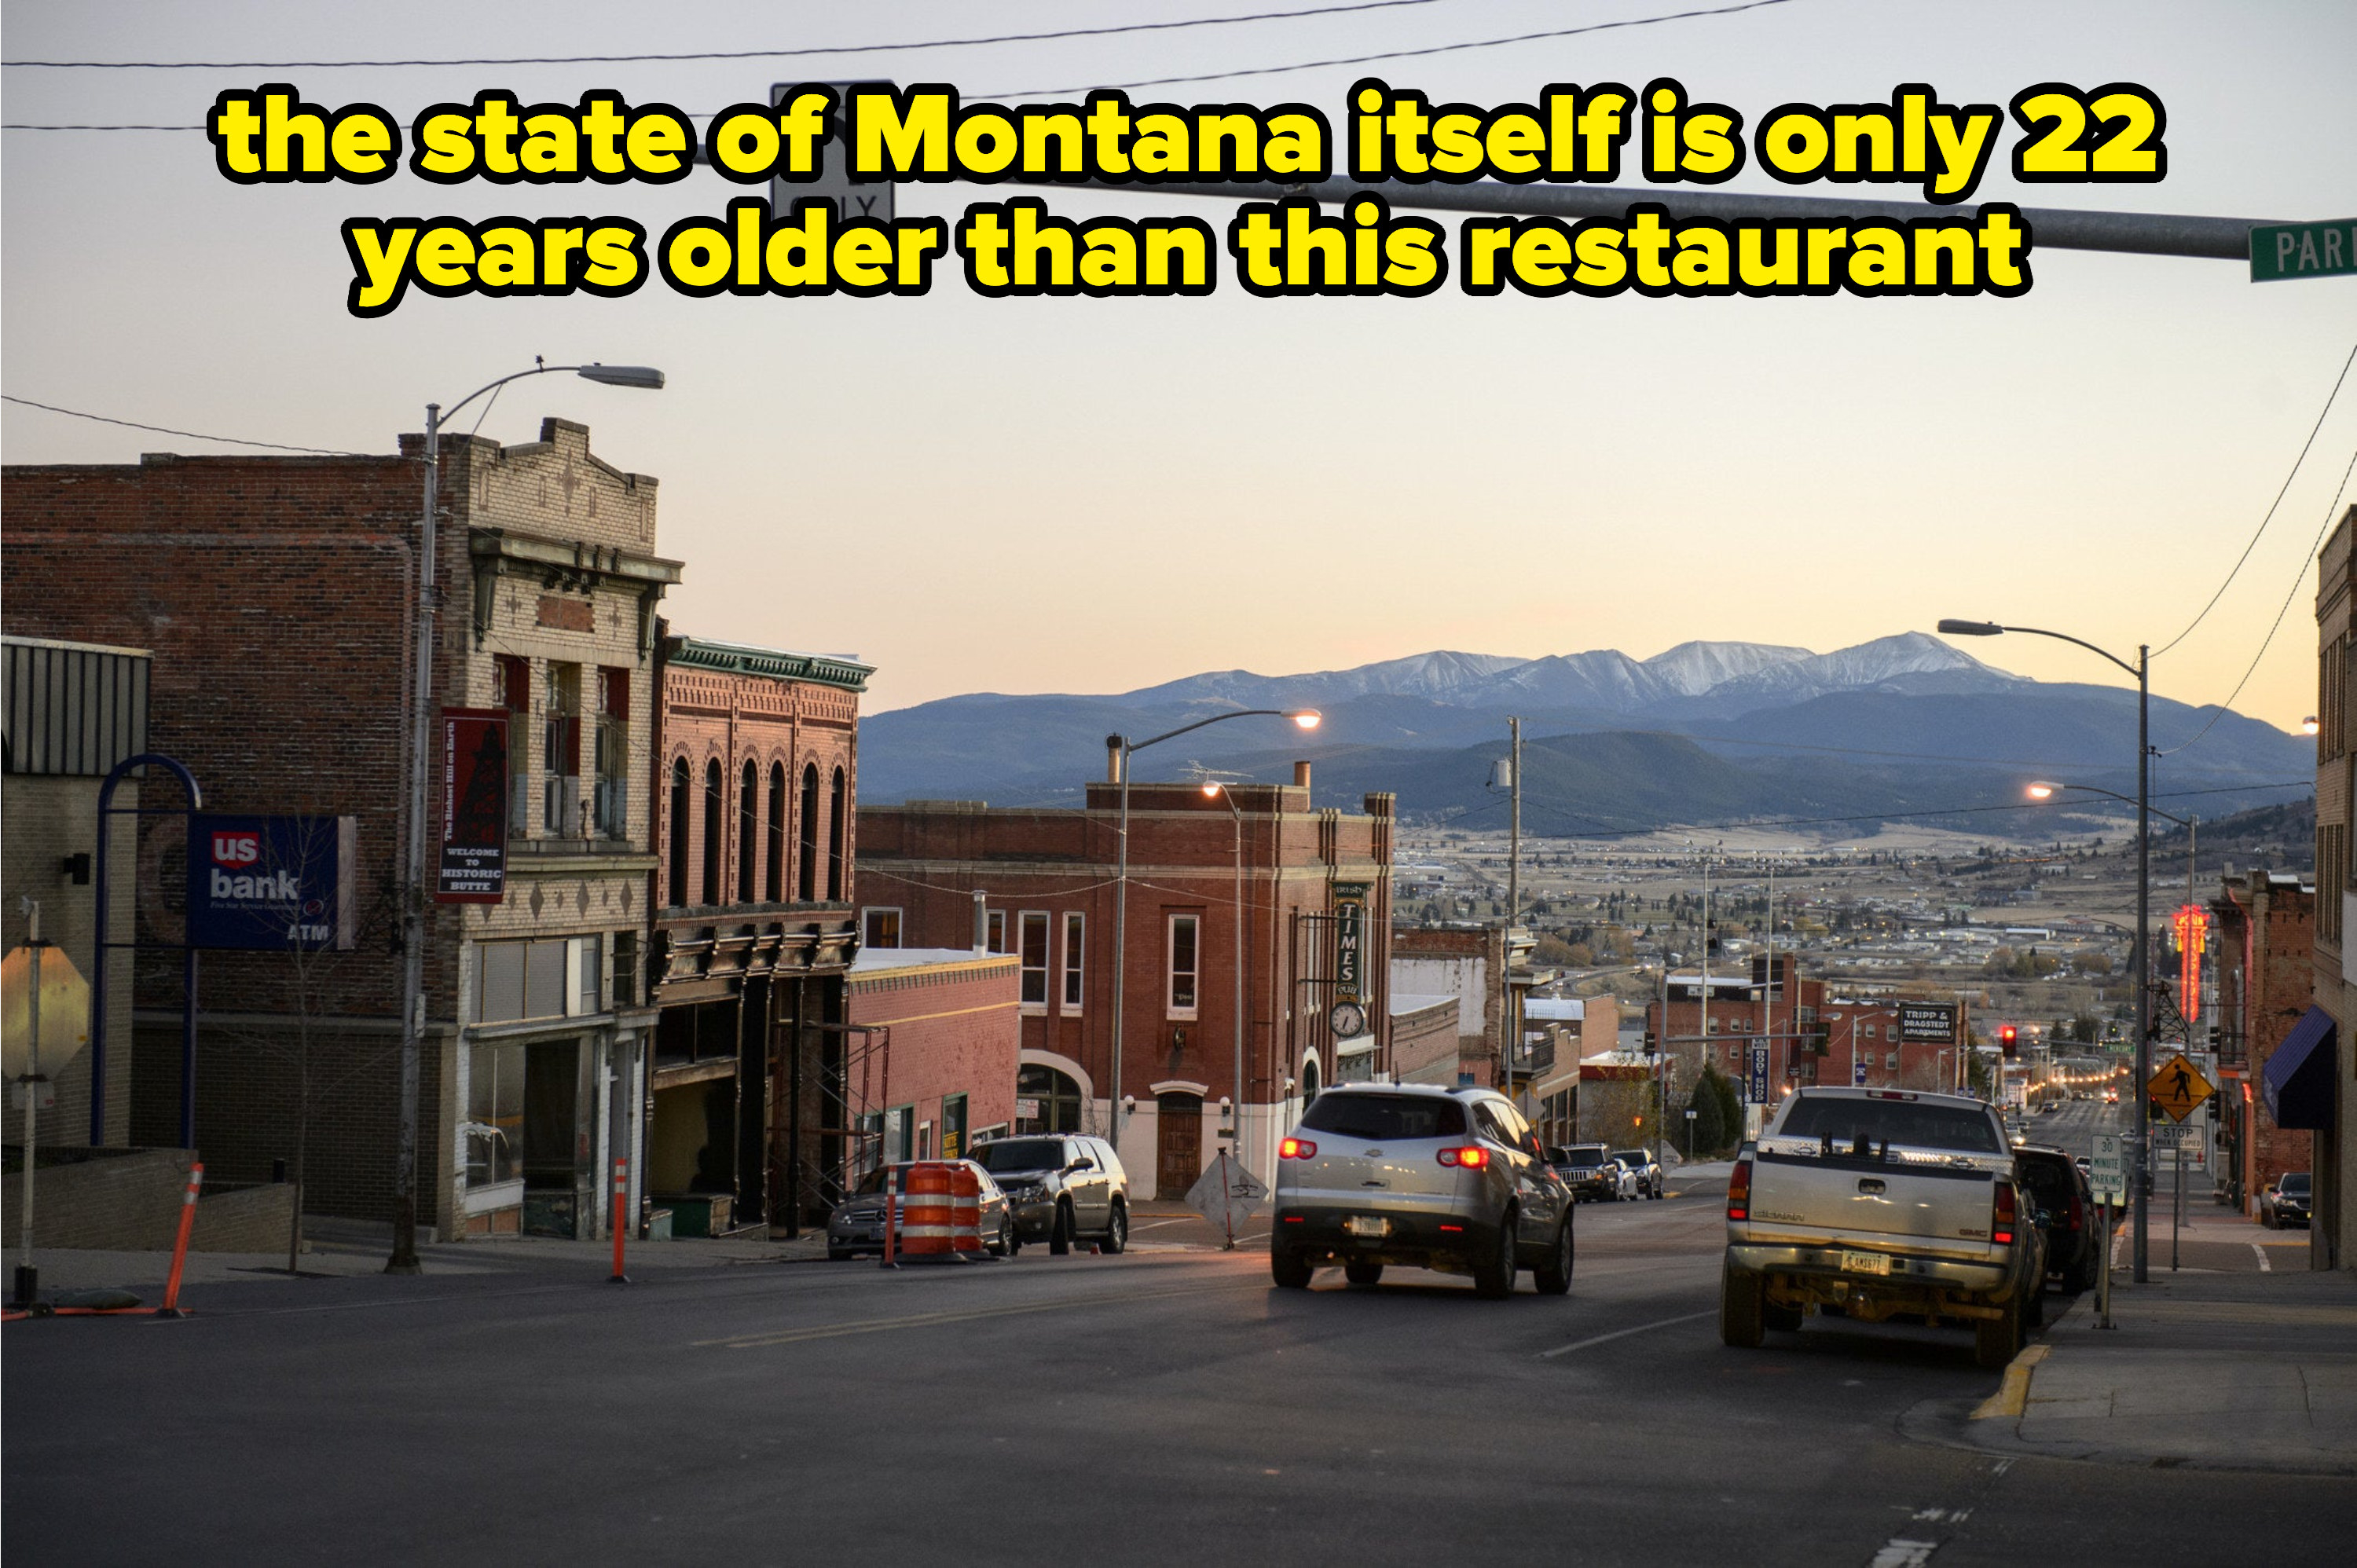 main street of Butte, Montana with caption: the state of Montana itself is only 22 years older than this restaurant